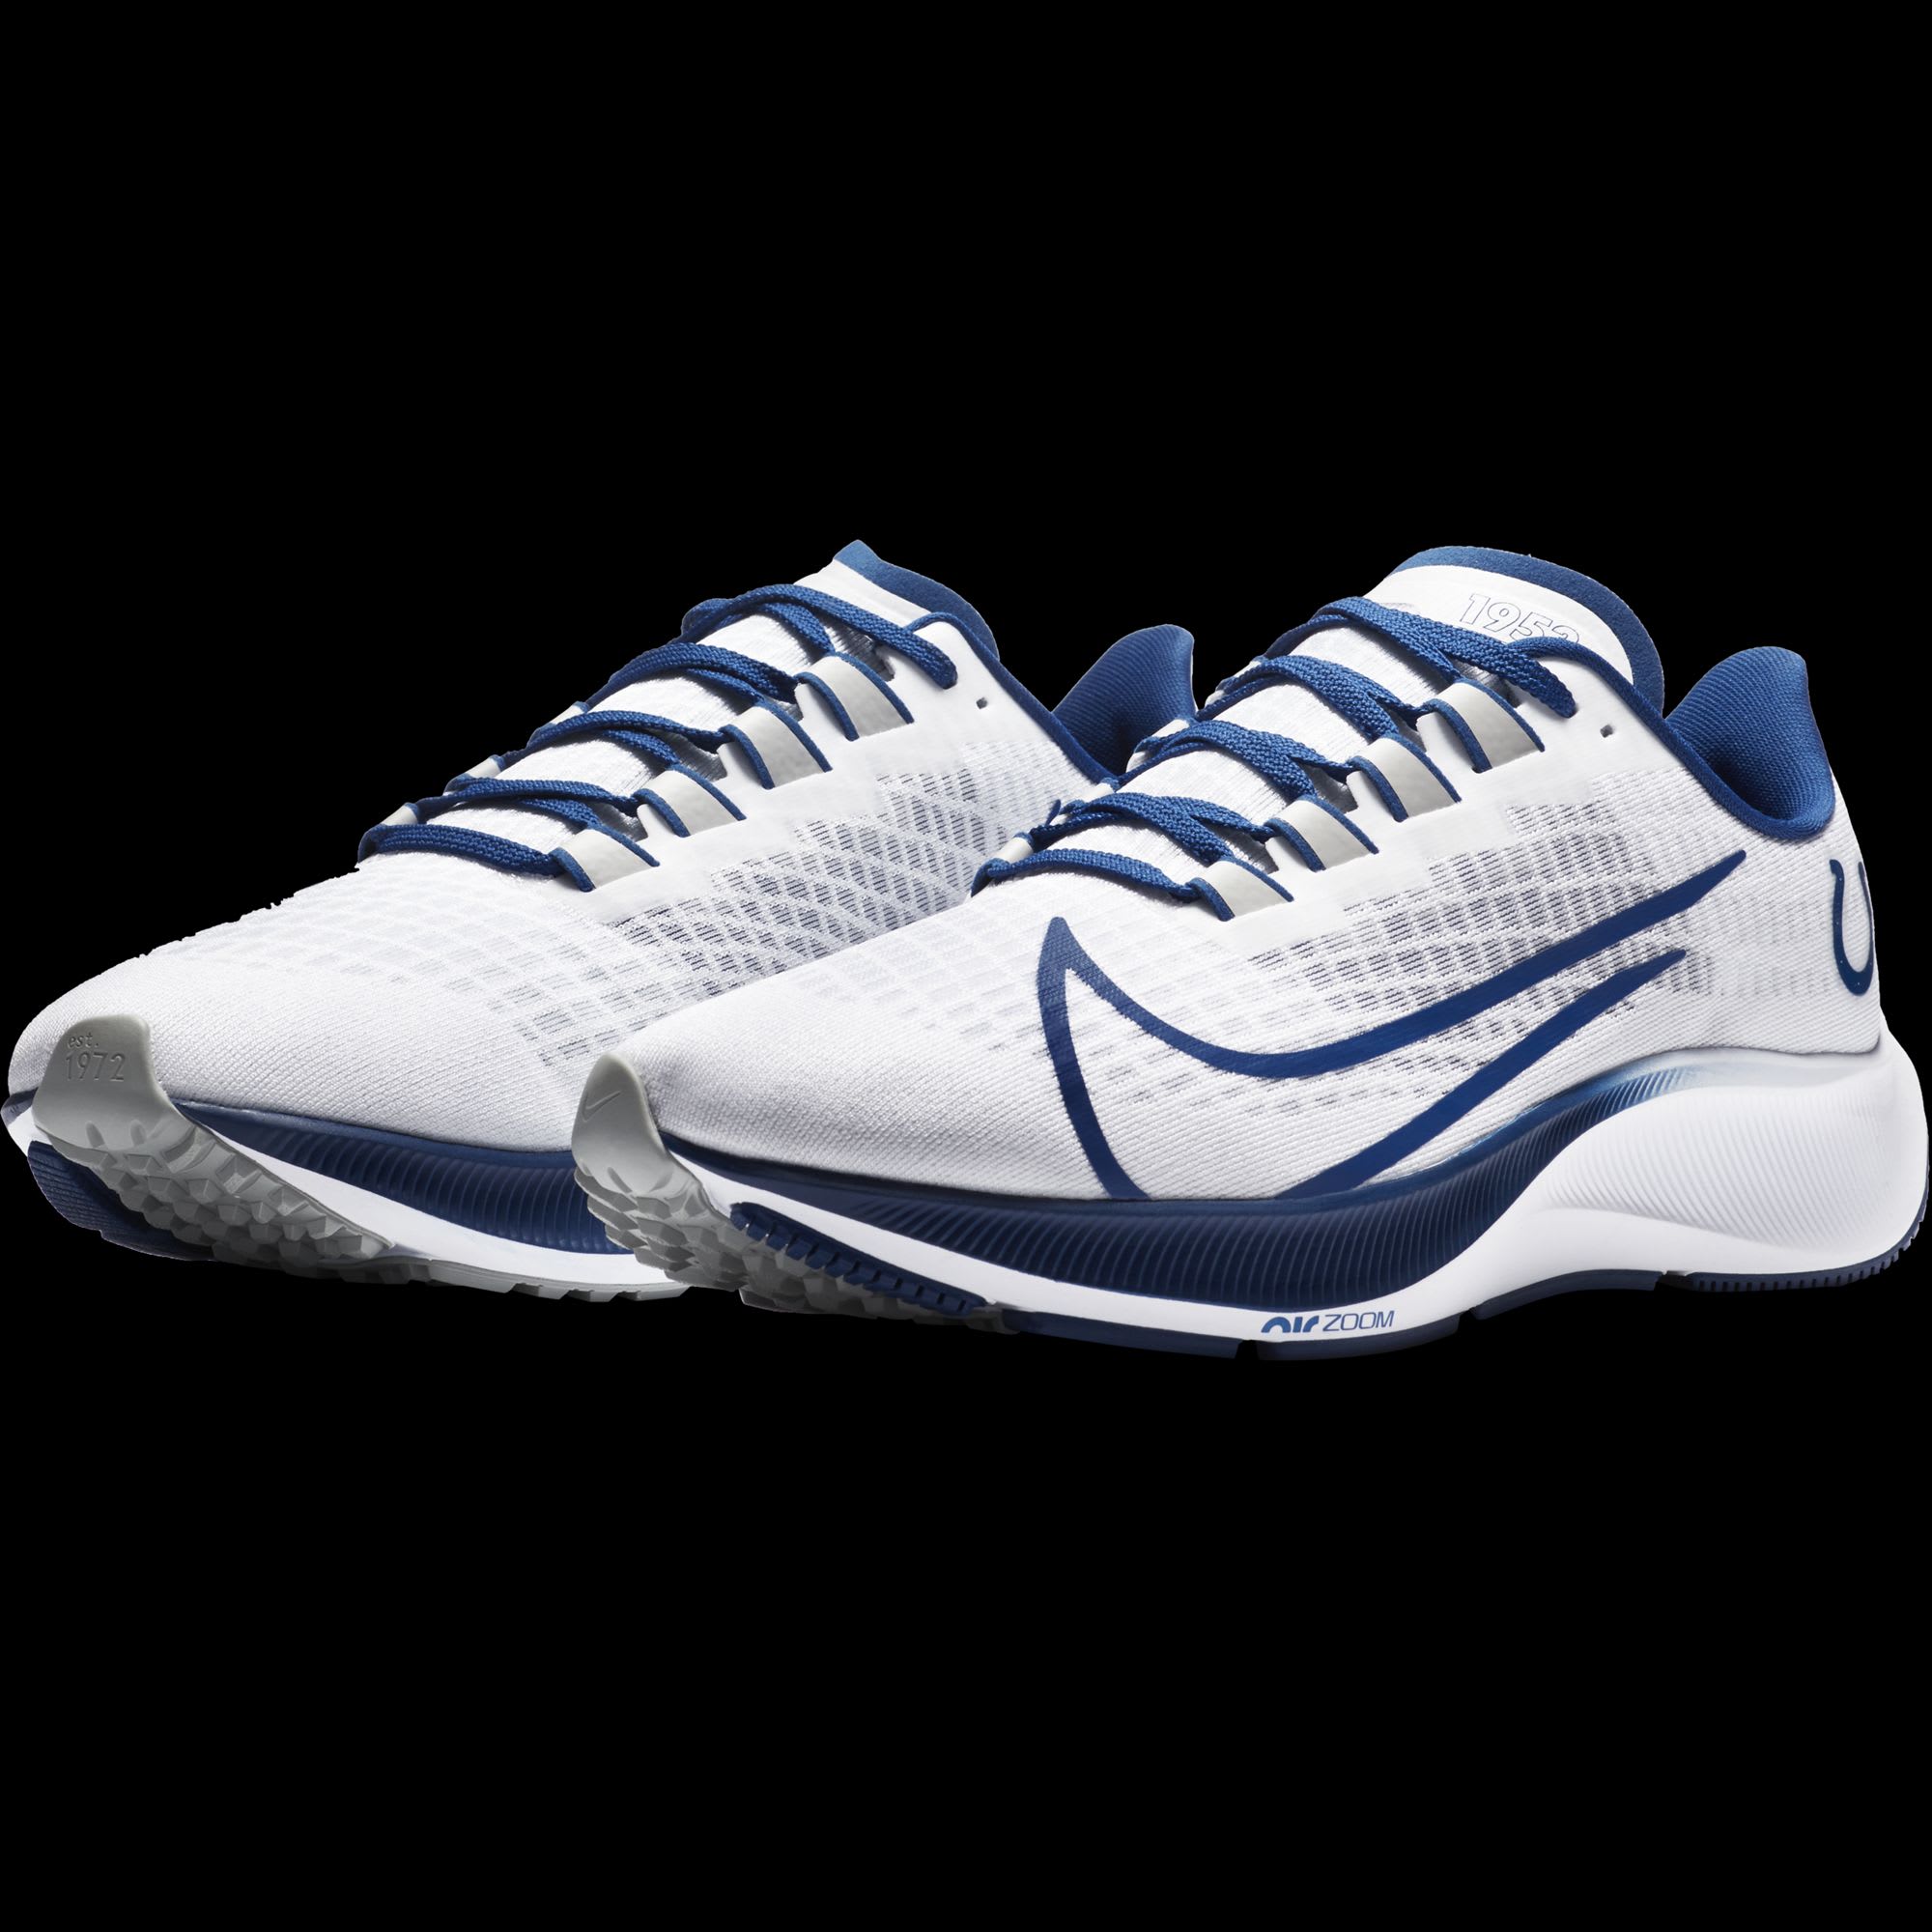 These Nike Indianapolis Colts running shoes are awesome